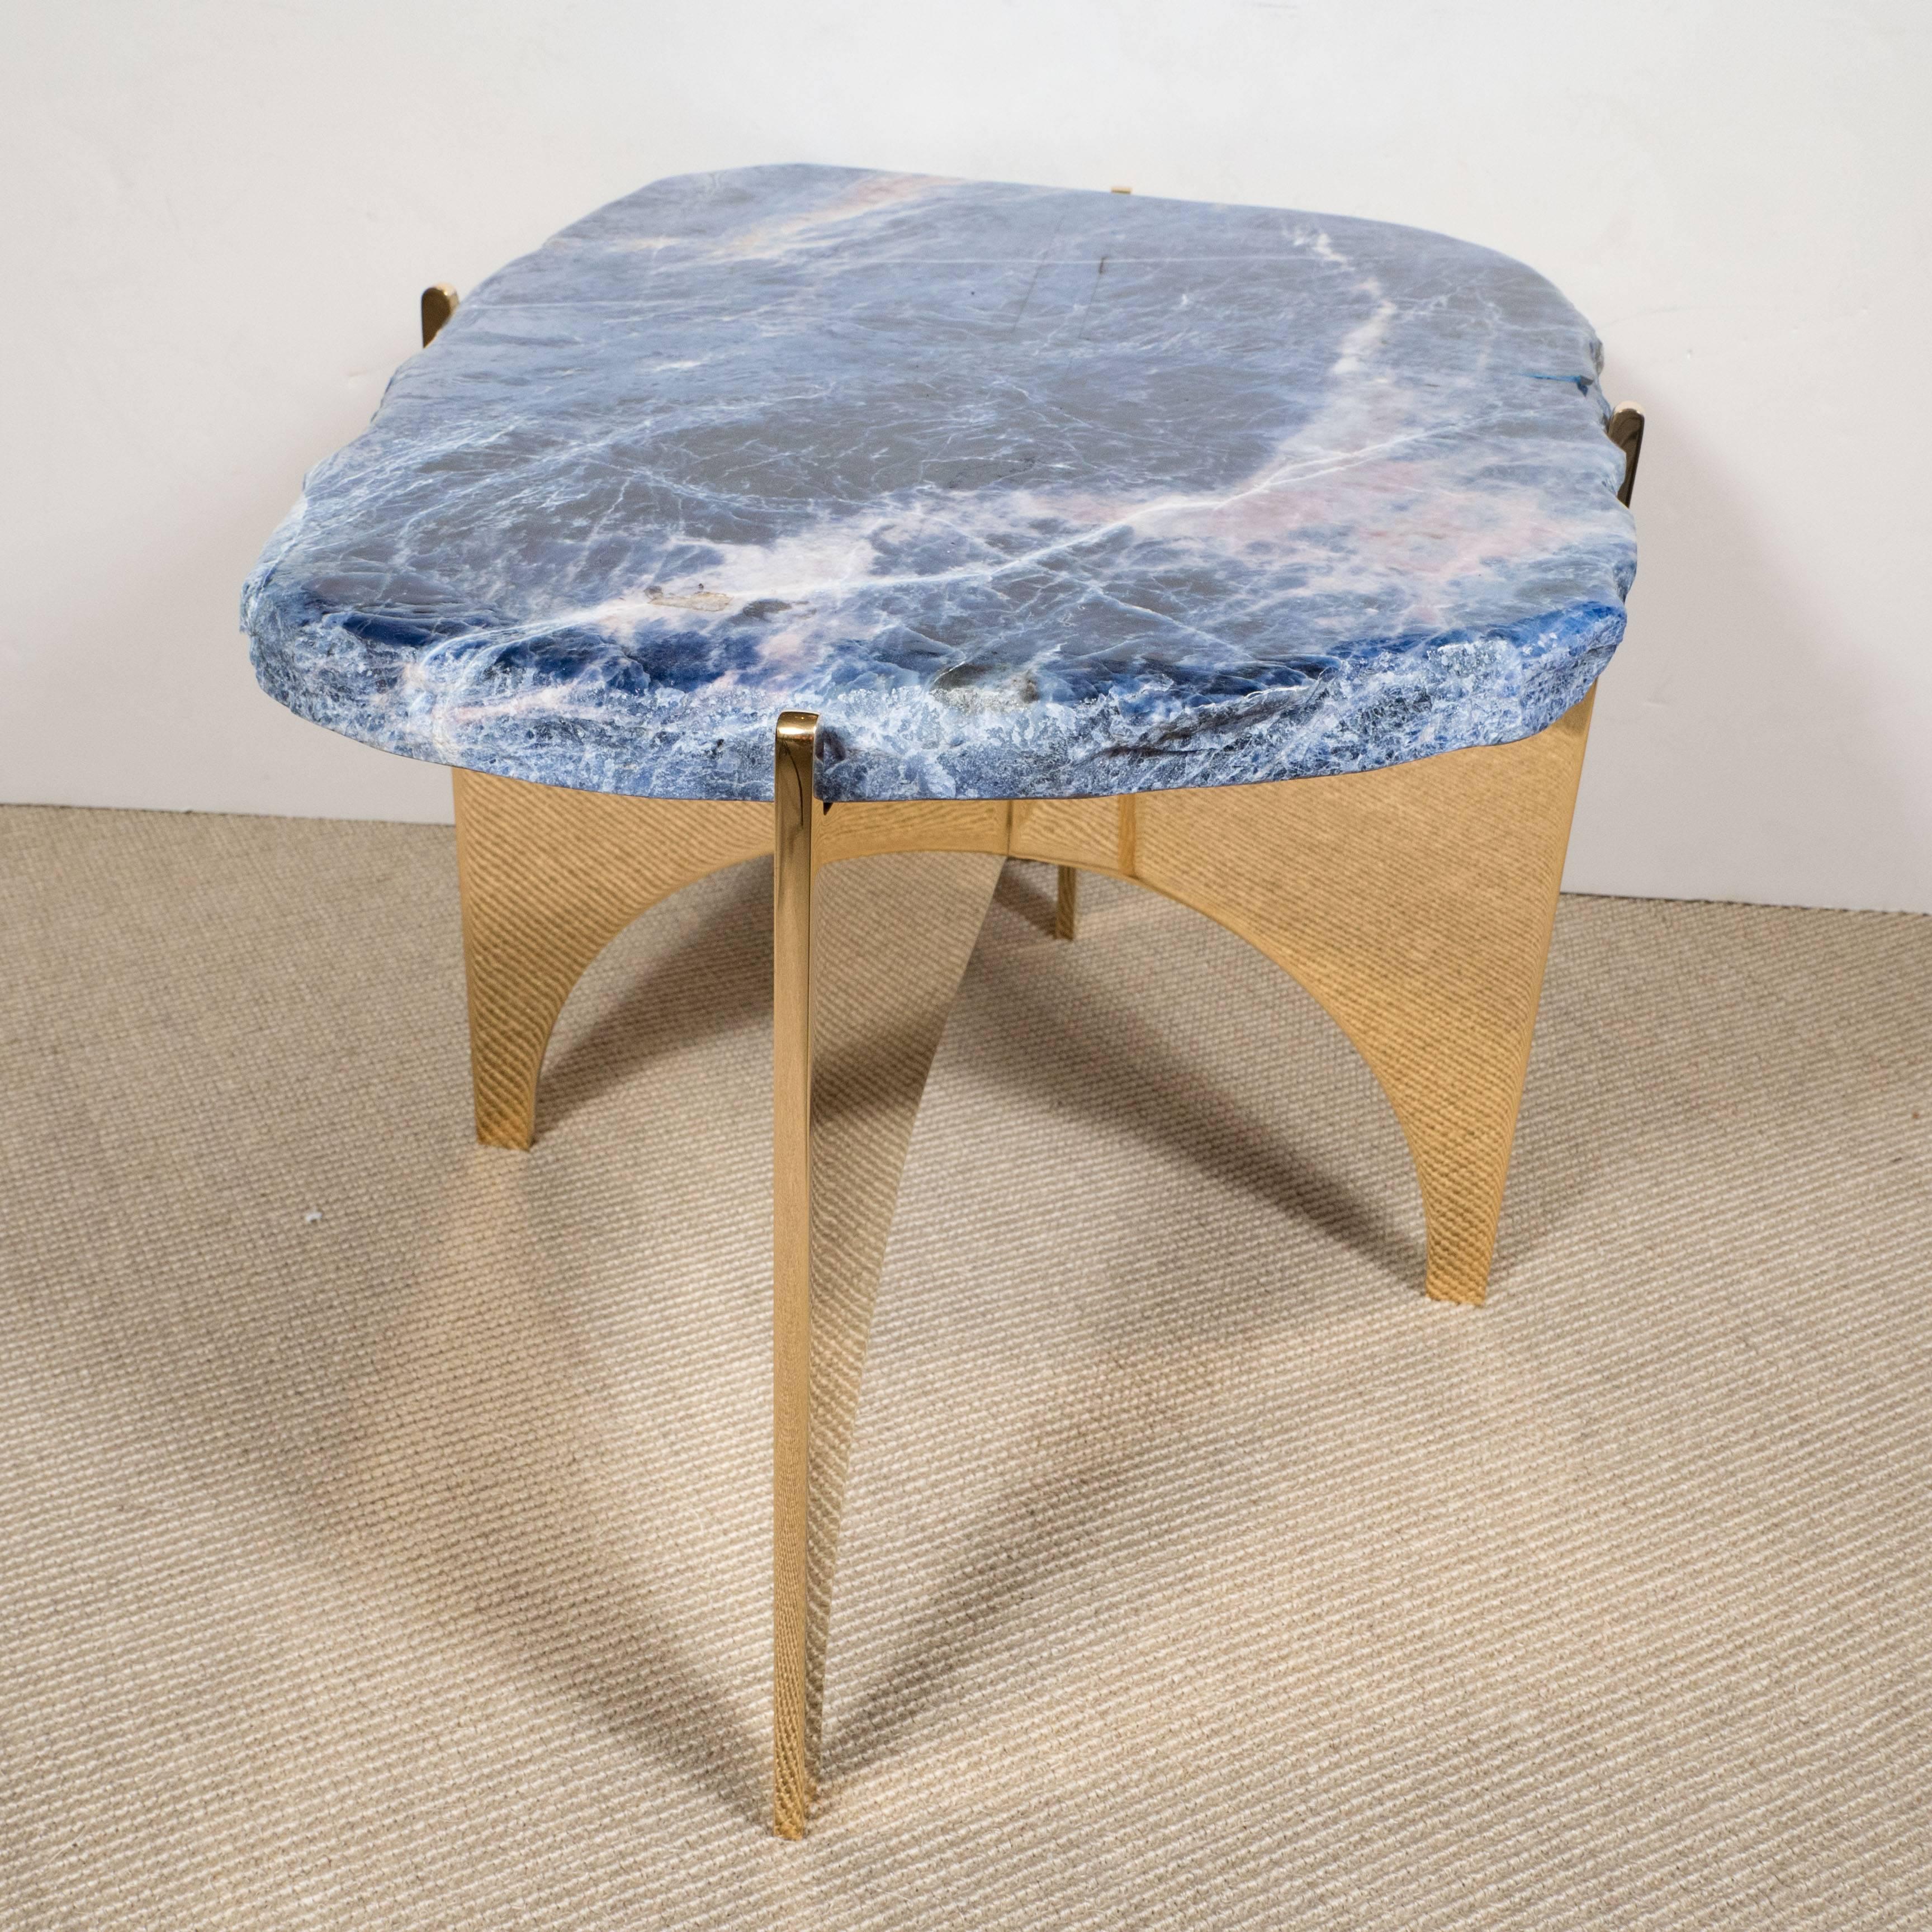 Other Sodalight Gemstone Top Table with Mirror Polished Bronze Base For Sale